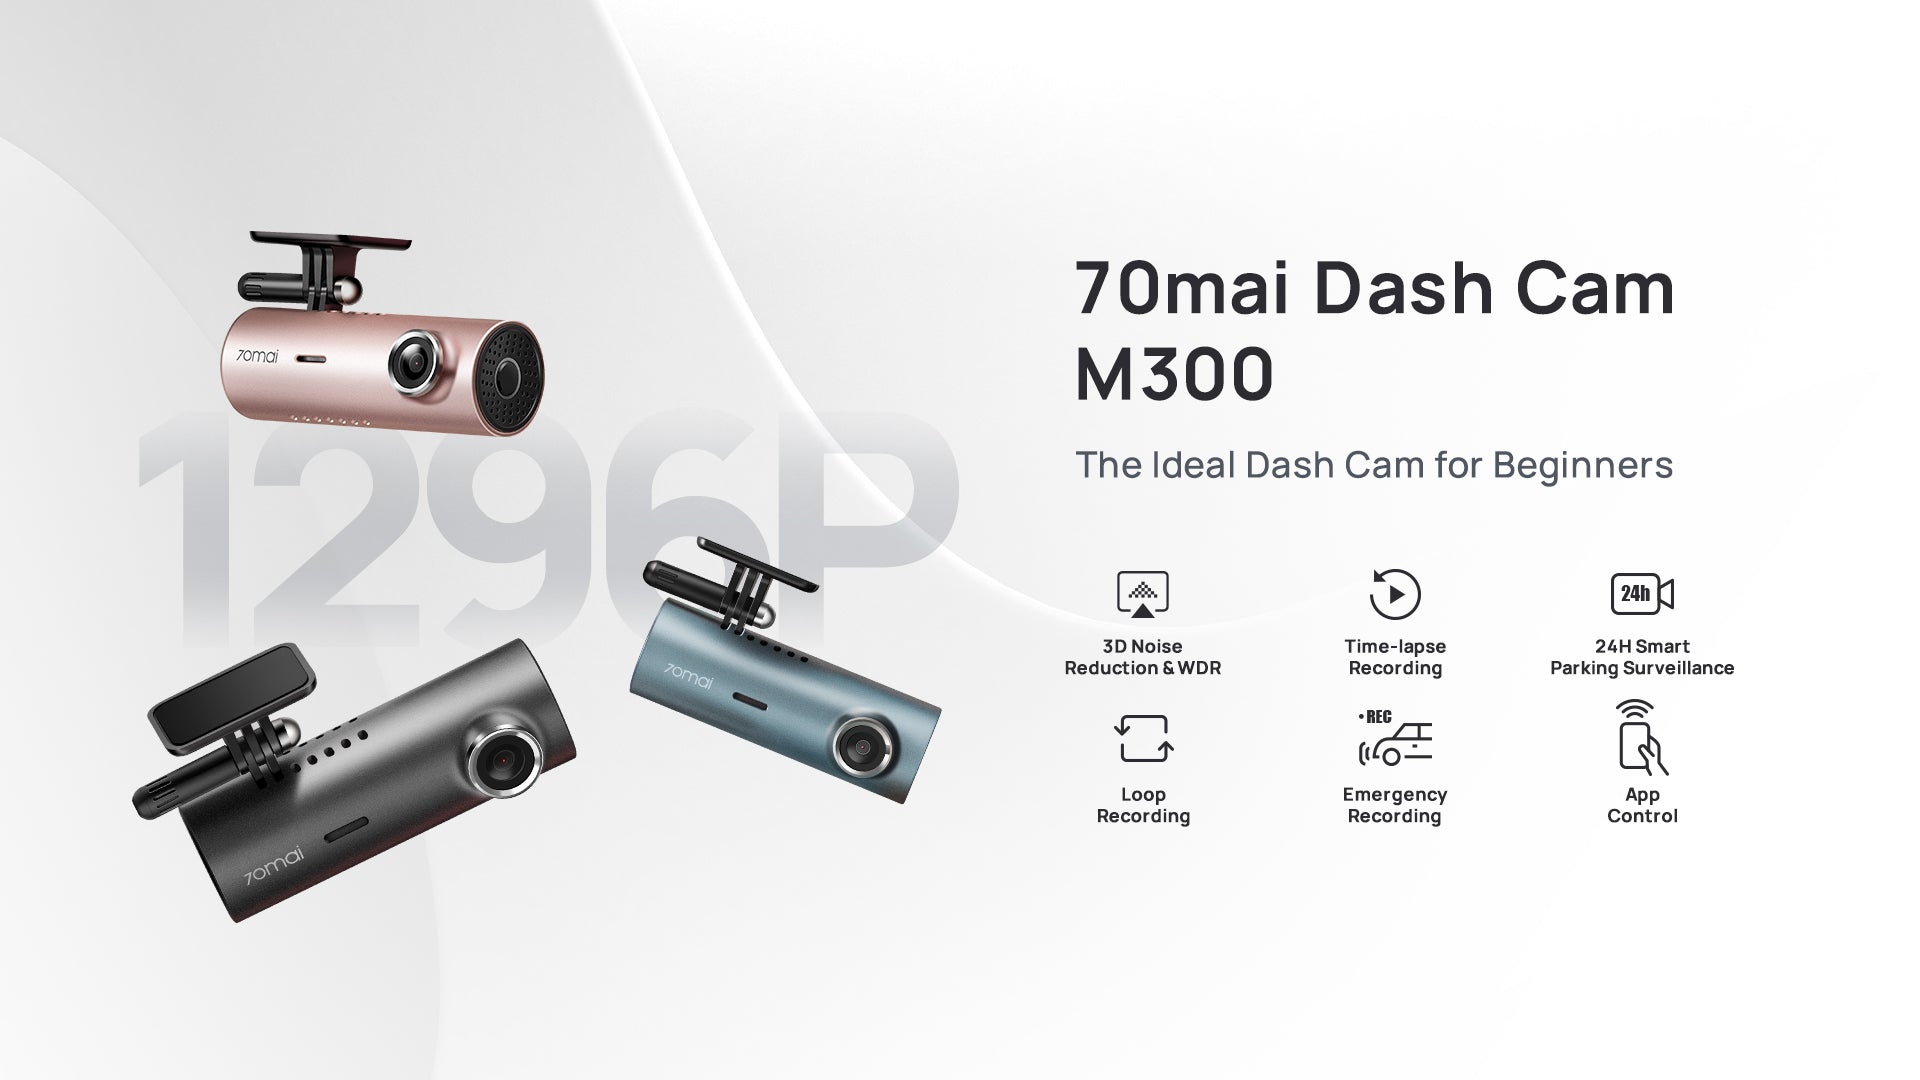 70mai Dash Cam M300, 1296P QHD, Built in WiFi Smart Dash Camera for Cars,  140° Wide-Angle FOV, WDR, Night Vision, iOS/Android Mobile App